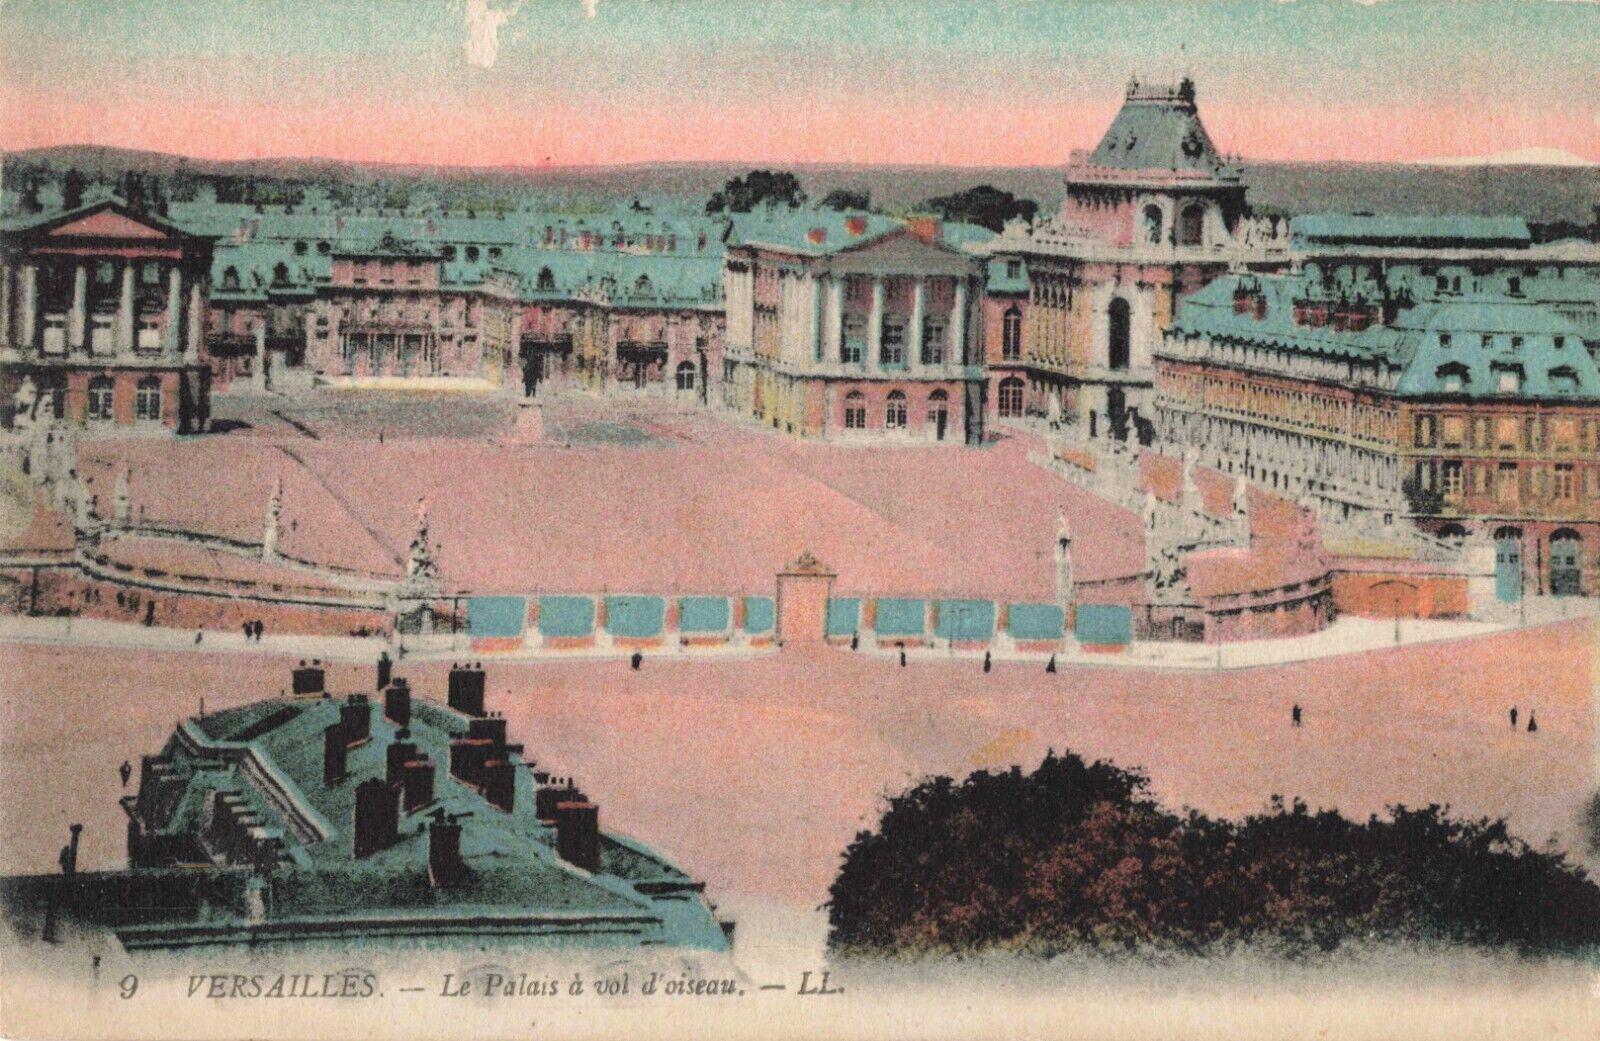 Versailles France, Birds Eye View of the Palace, Vintage Postcard